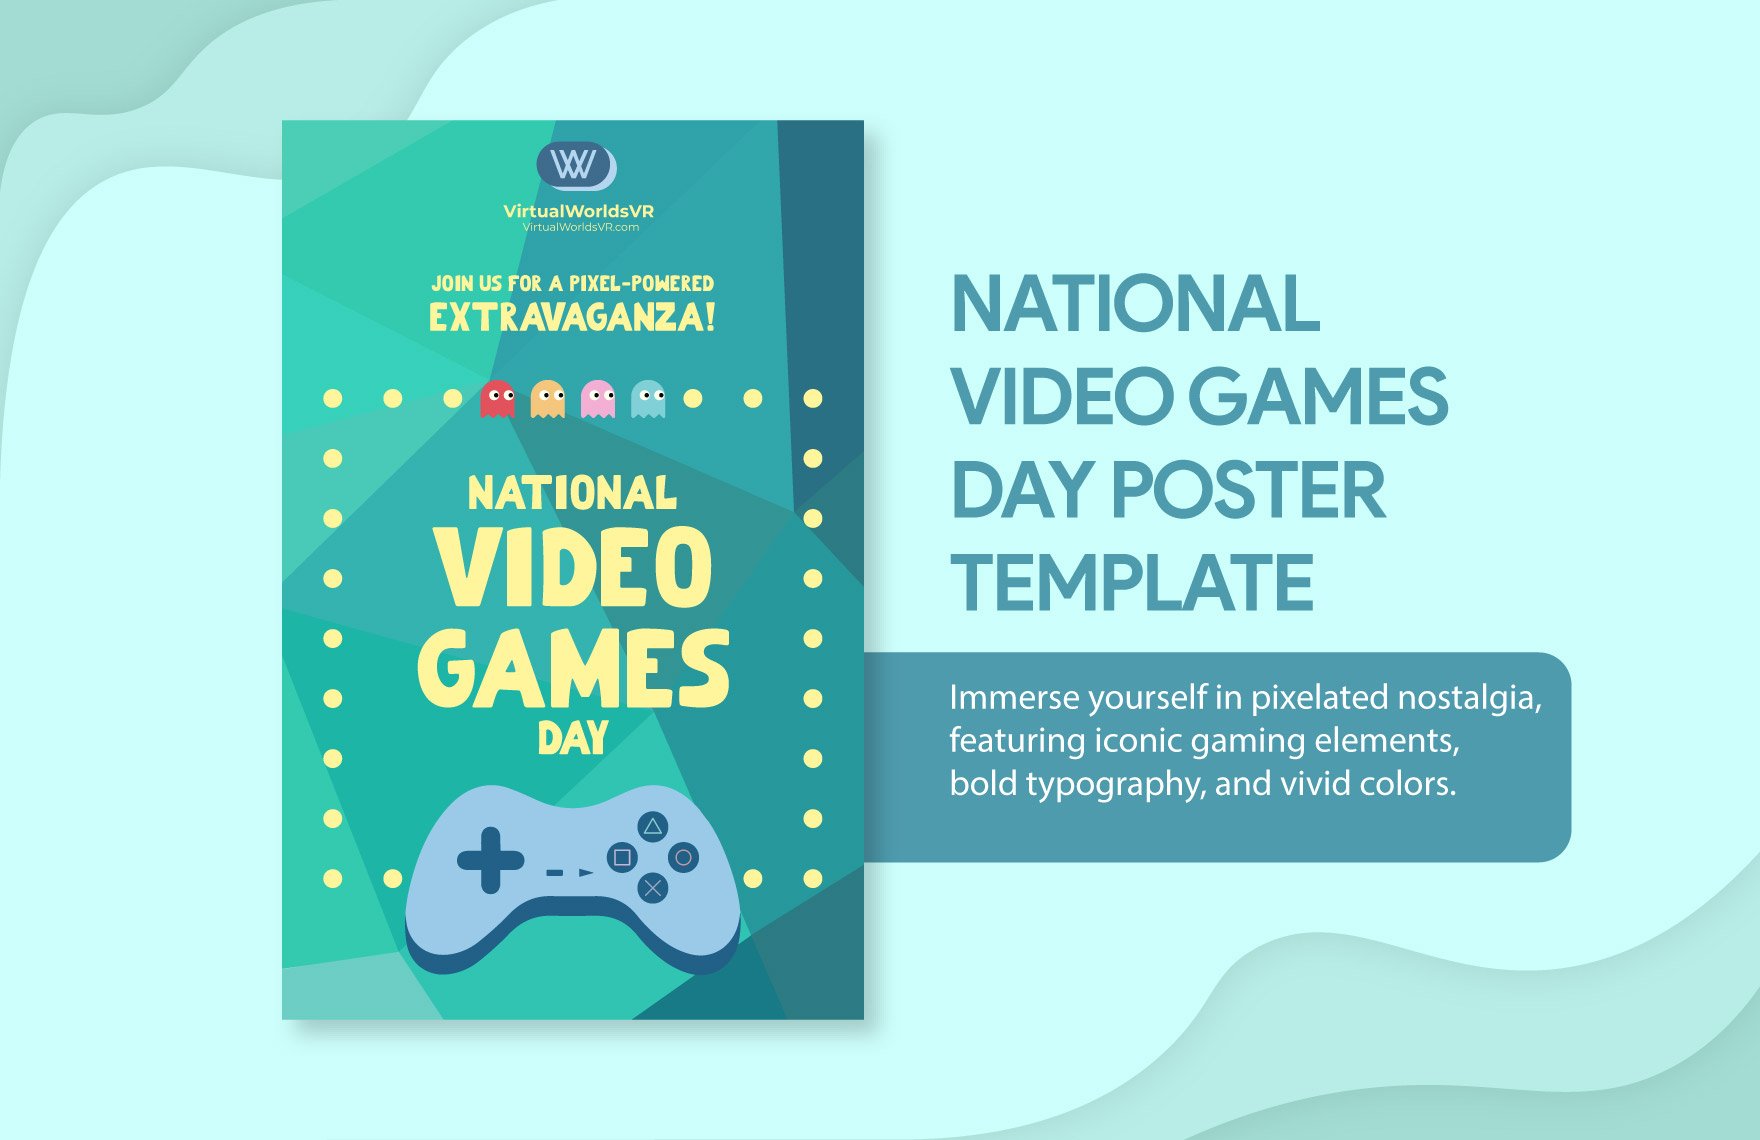 National Video Games Day Poster Template